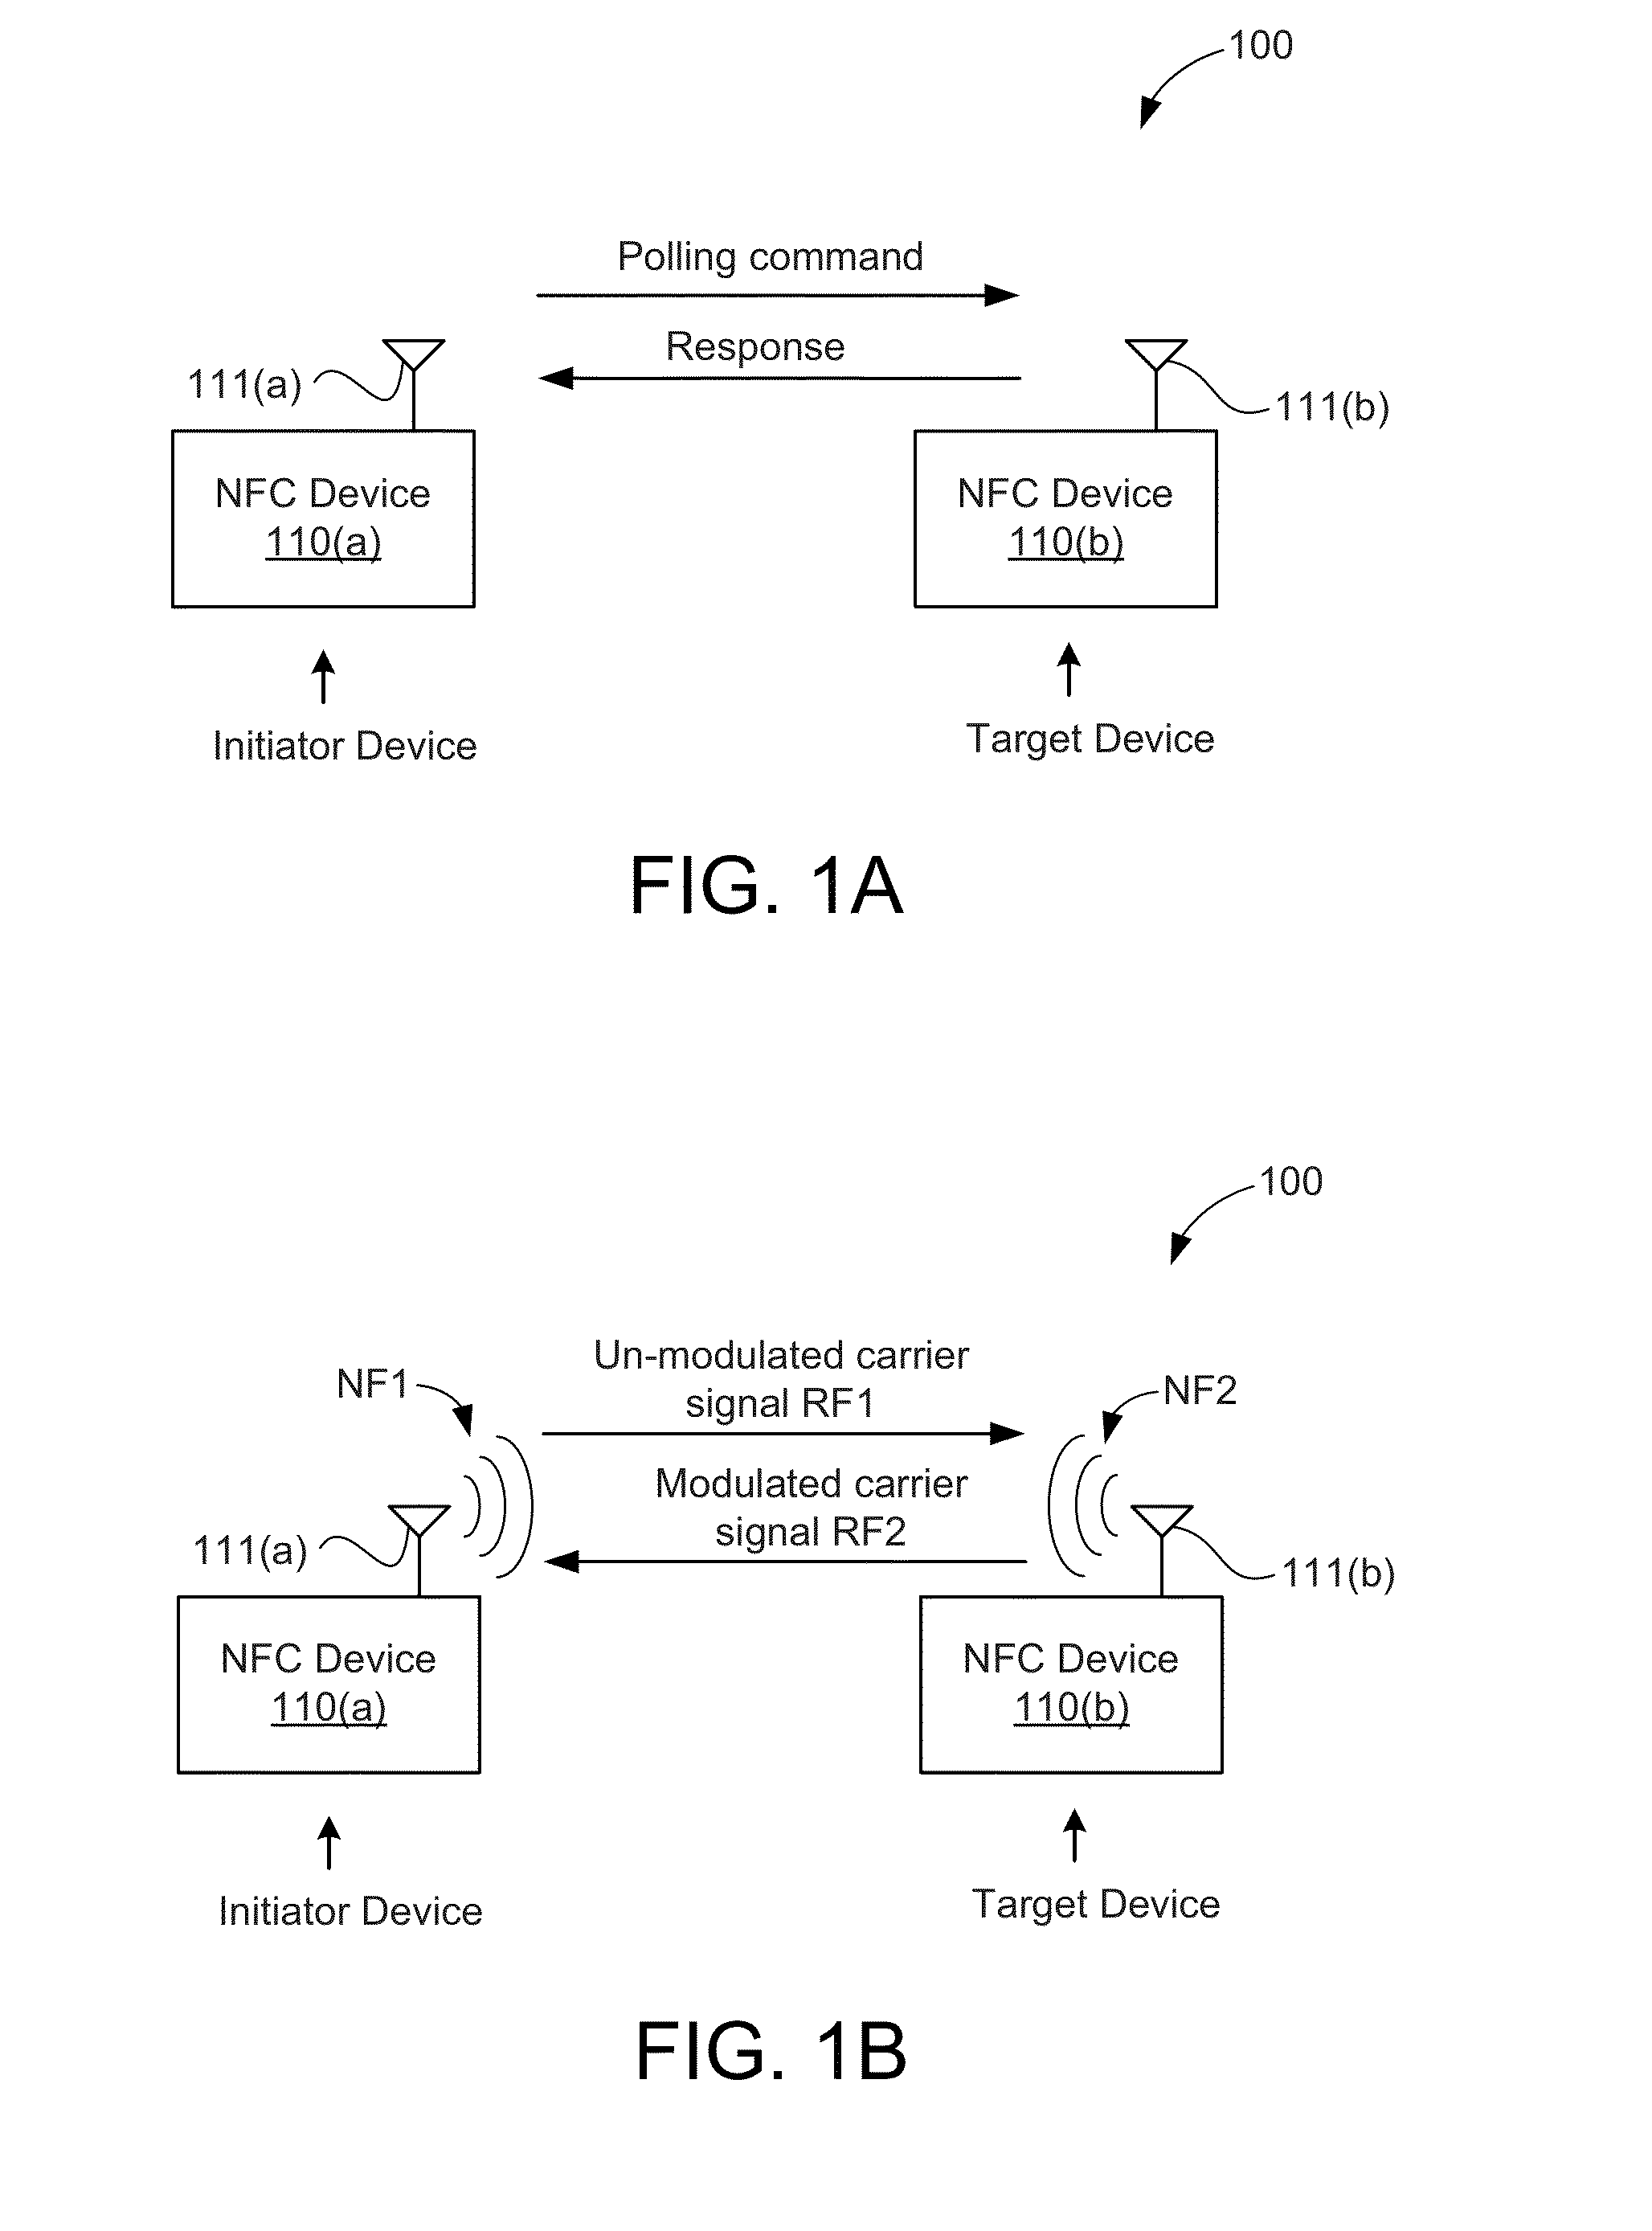 Direct power transmission load modulation in near field communication devices